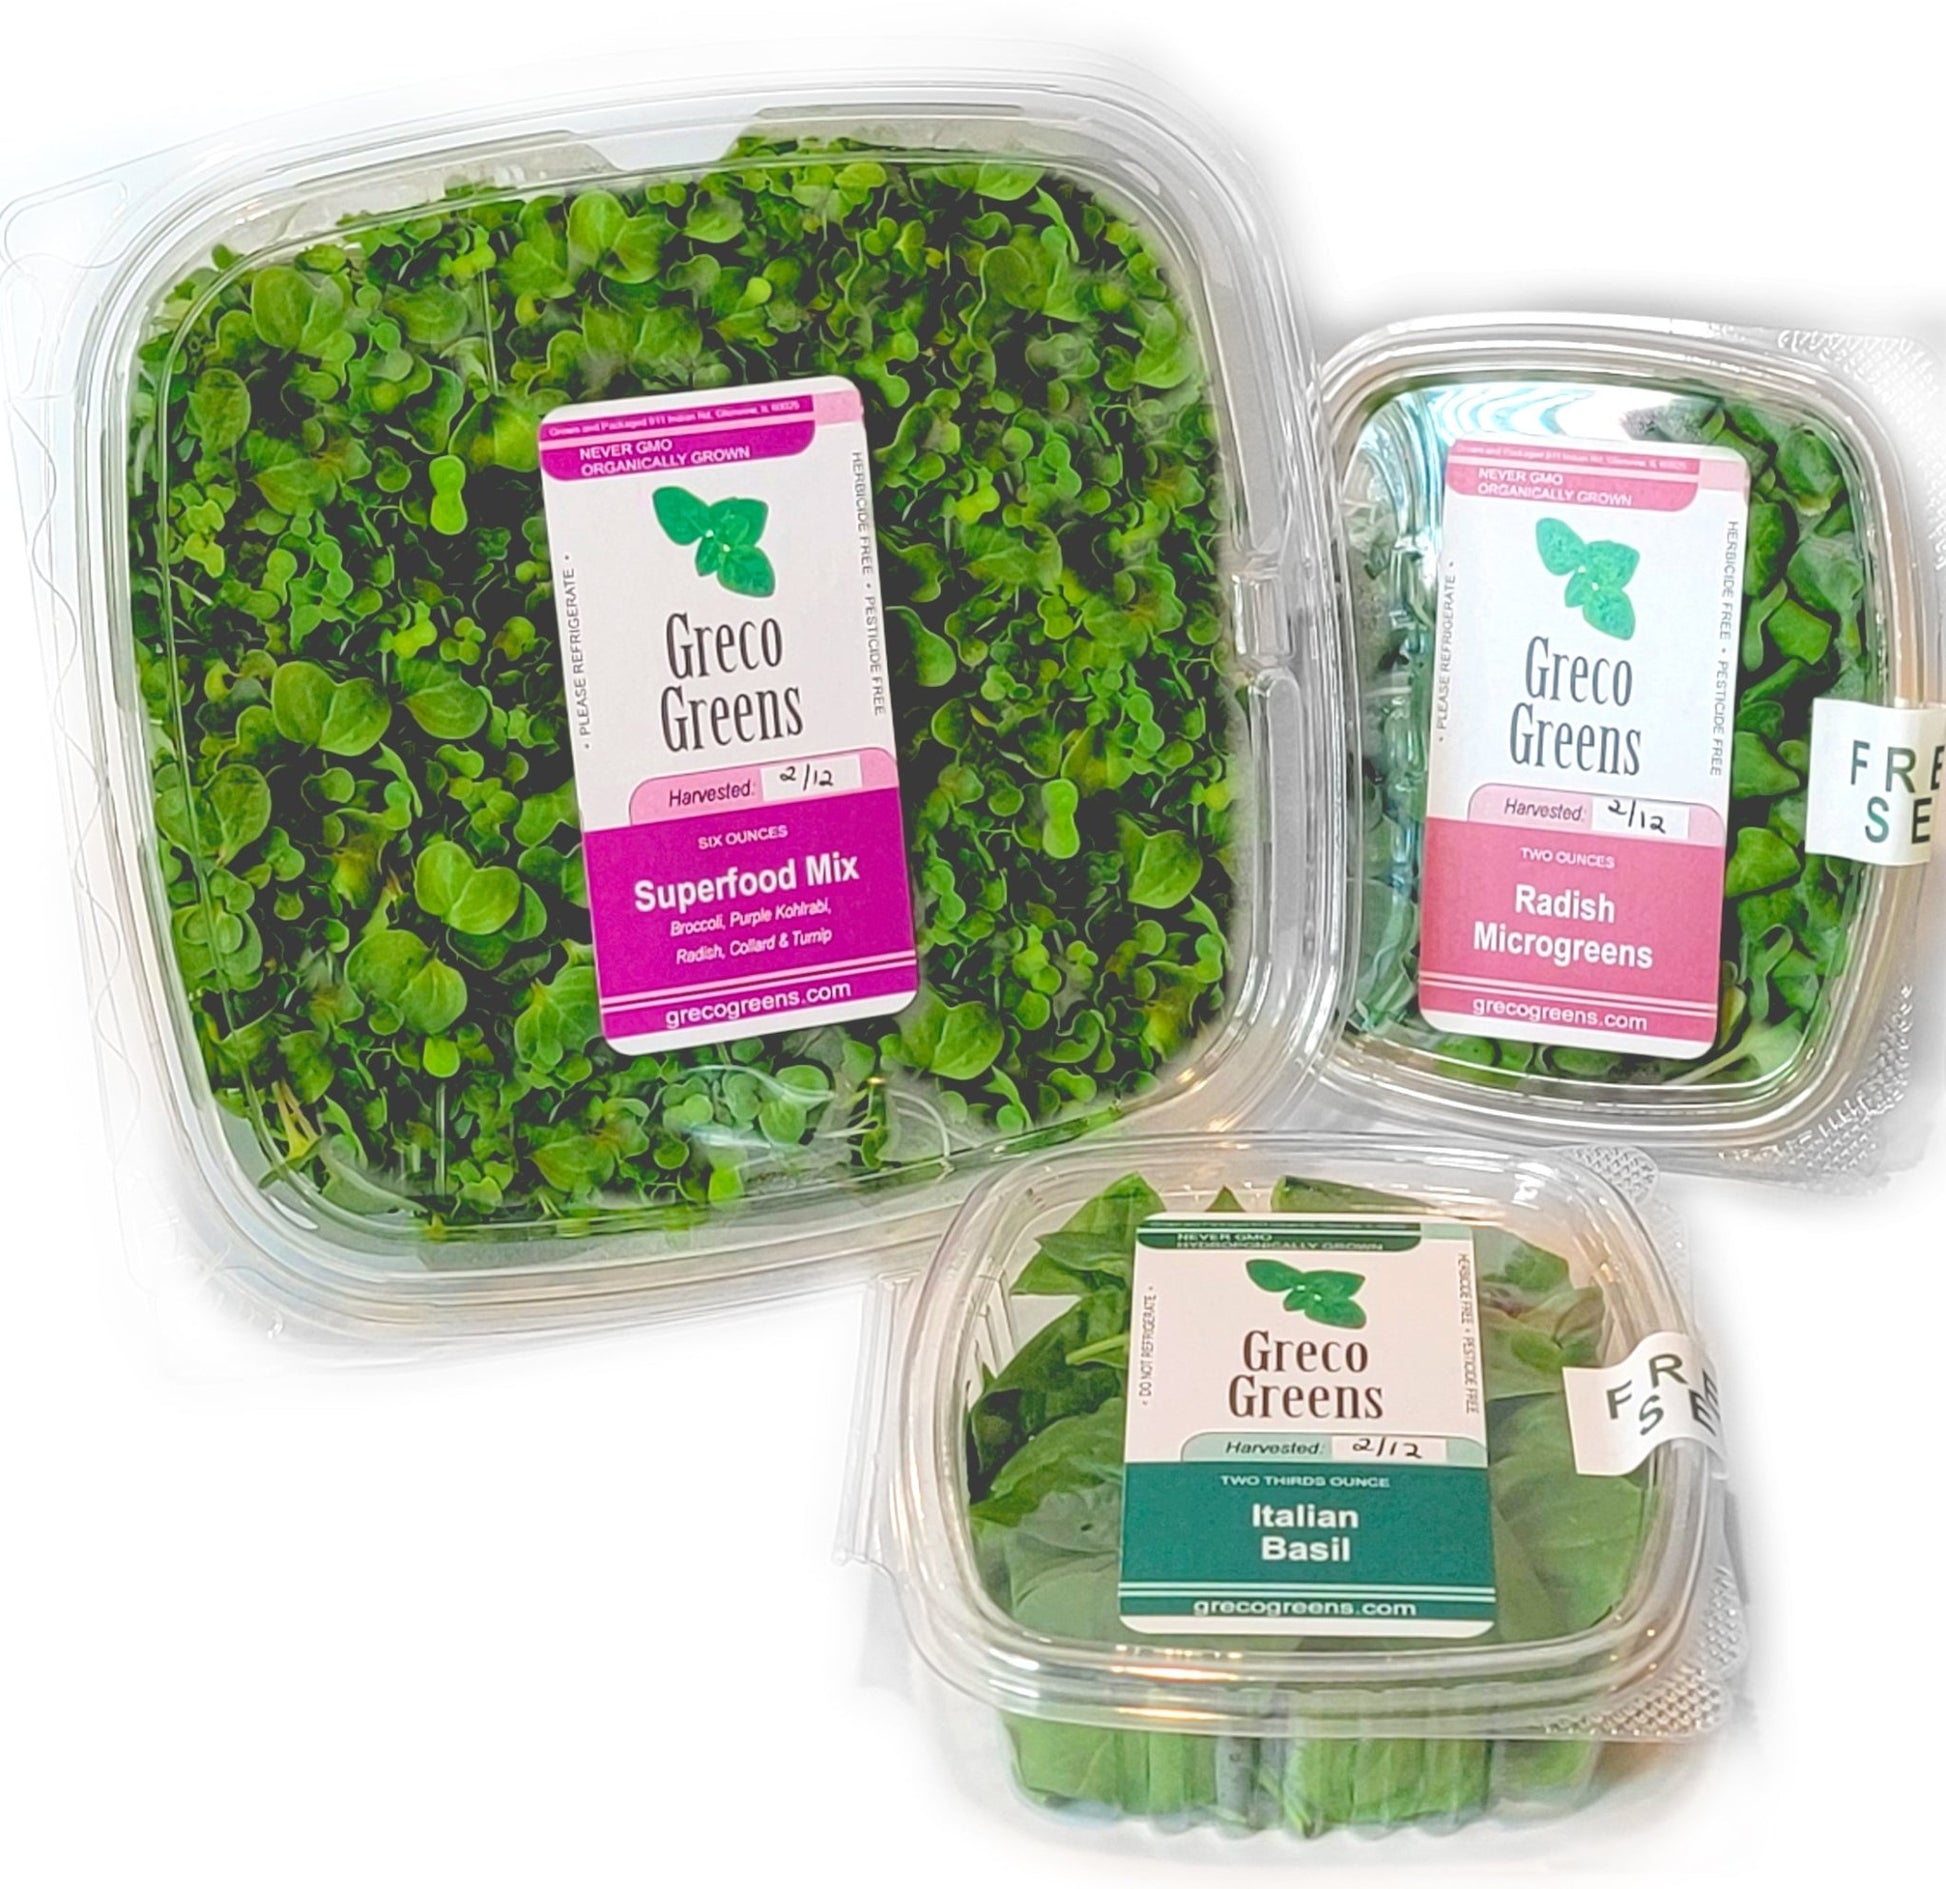 Flying Greens UPick Crate - Greco Greens